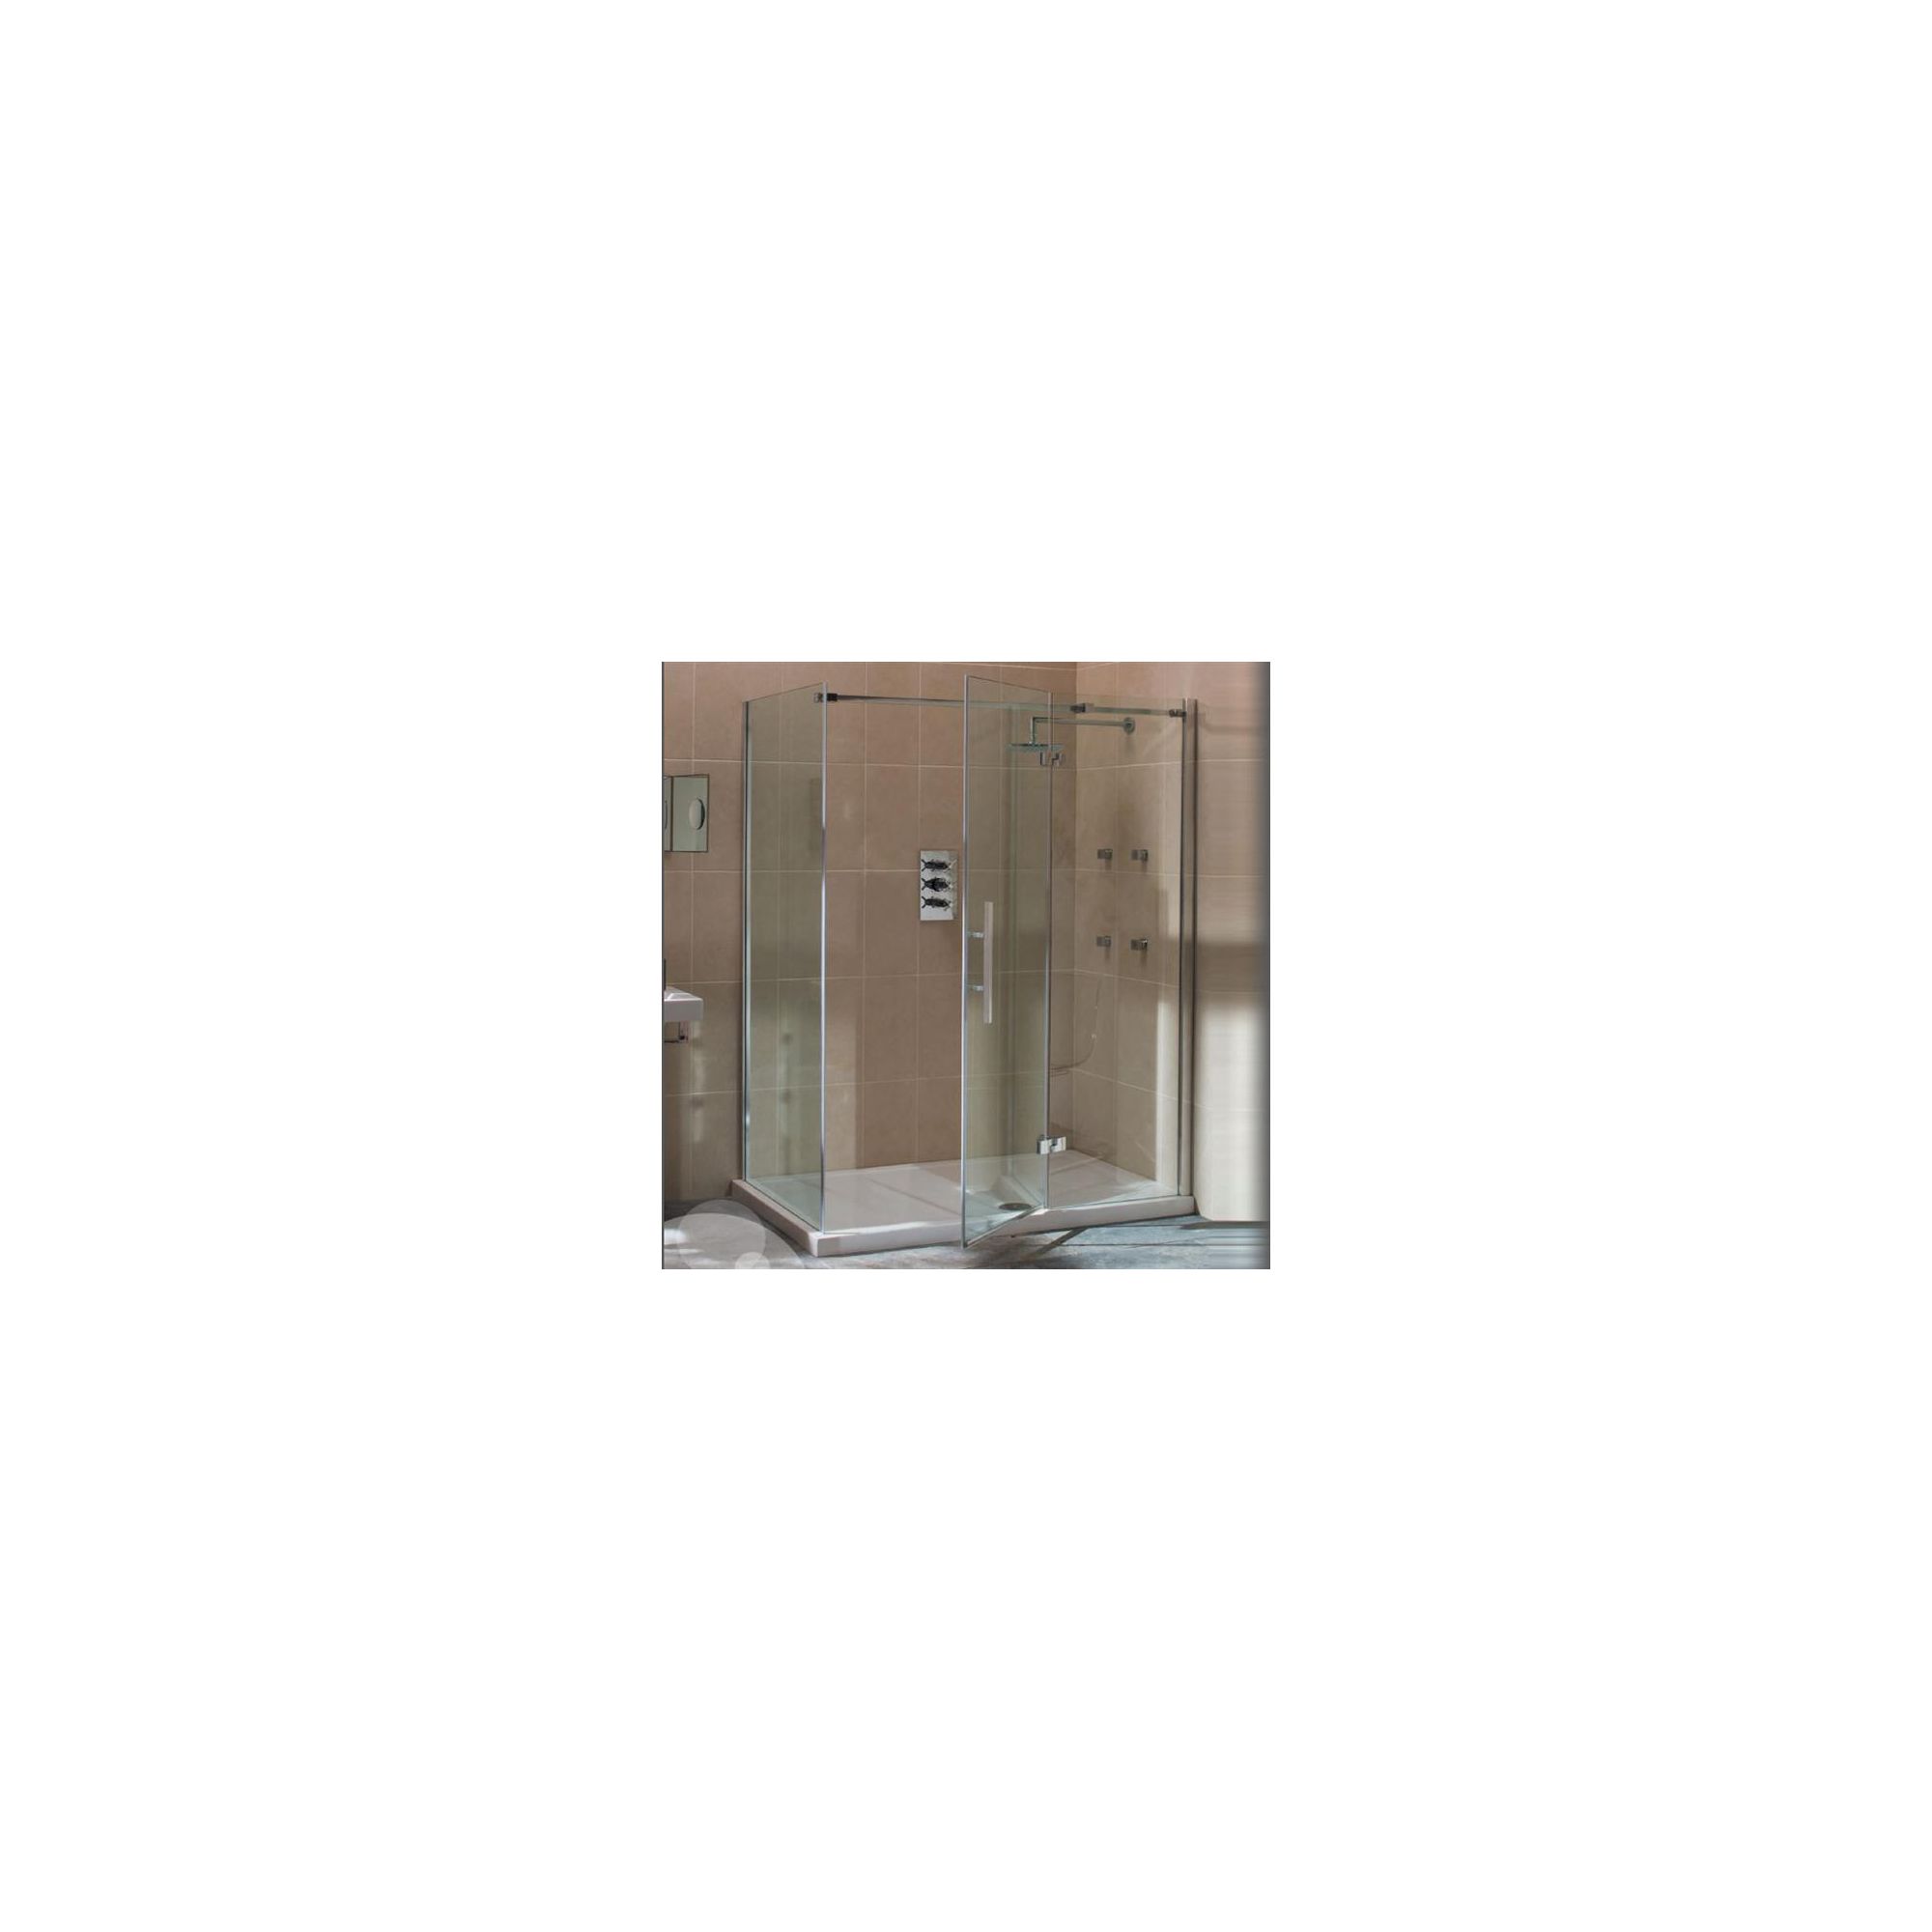 Merlyn Vivid Nine Hinged Door Shower Enclosure with Inline Panel, 1400mm x 900mm, Right Handed, Low Profile Tray, 8mm Glass at Tescos Direct